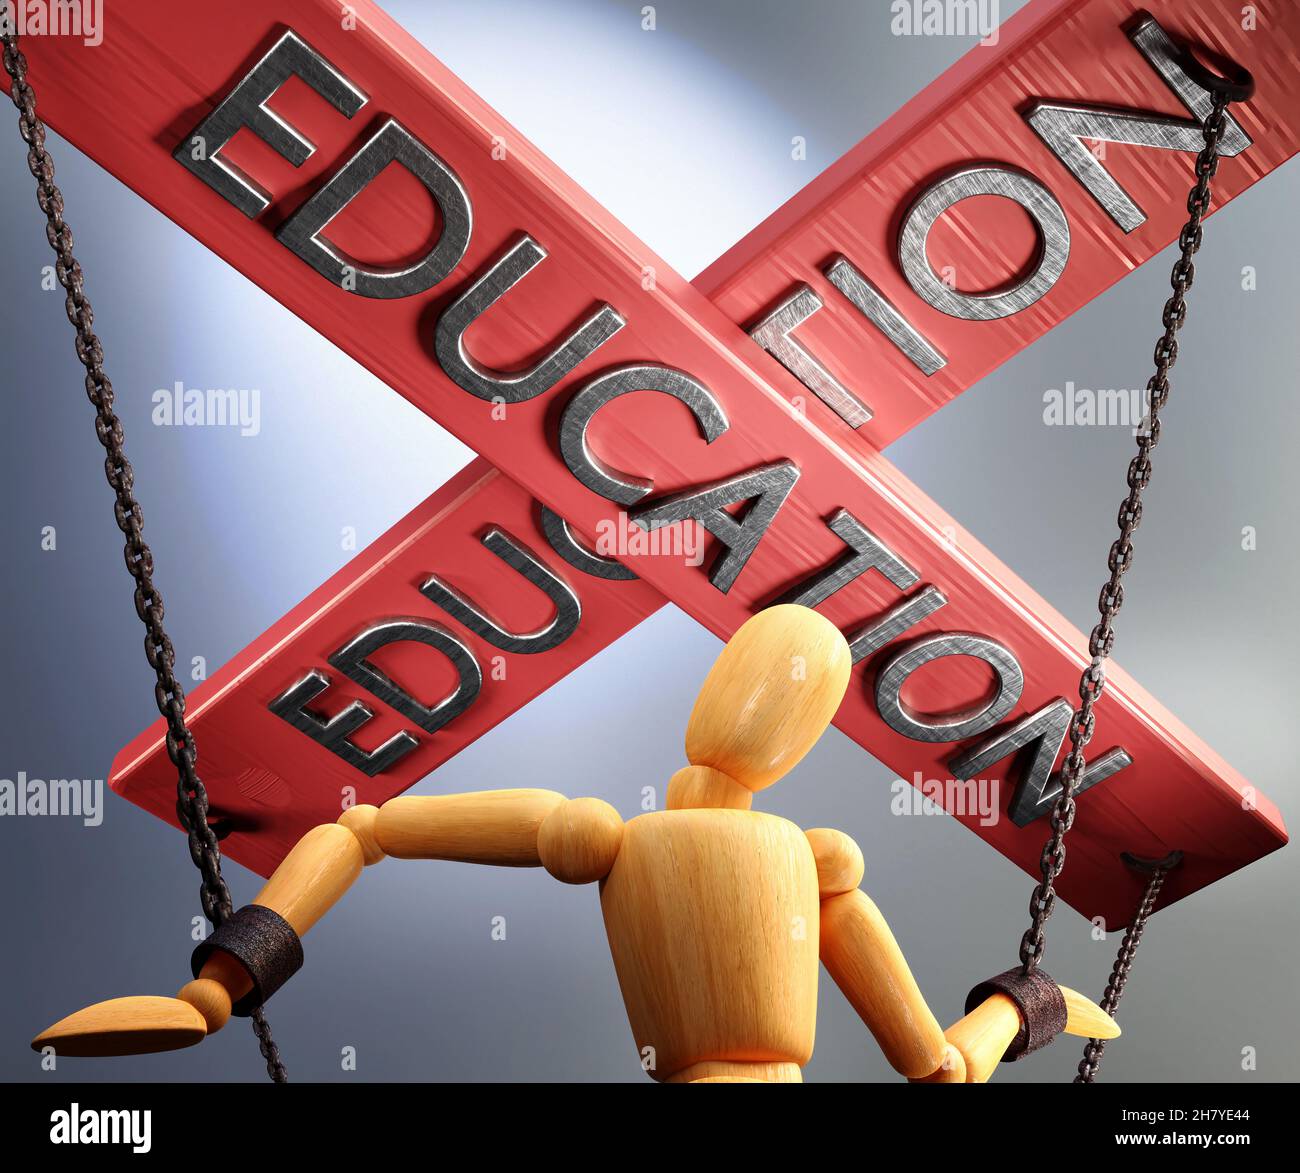 Education control, power, authority and manipulation symbolized by control bar with word Education pulling the strings (chains) of a wooden puppet, 3d Stock Photo